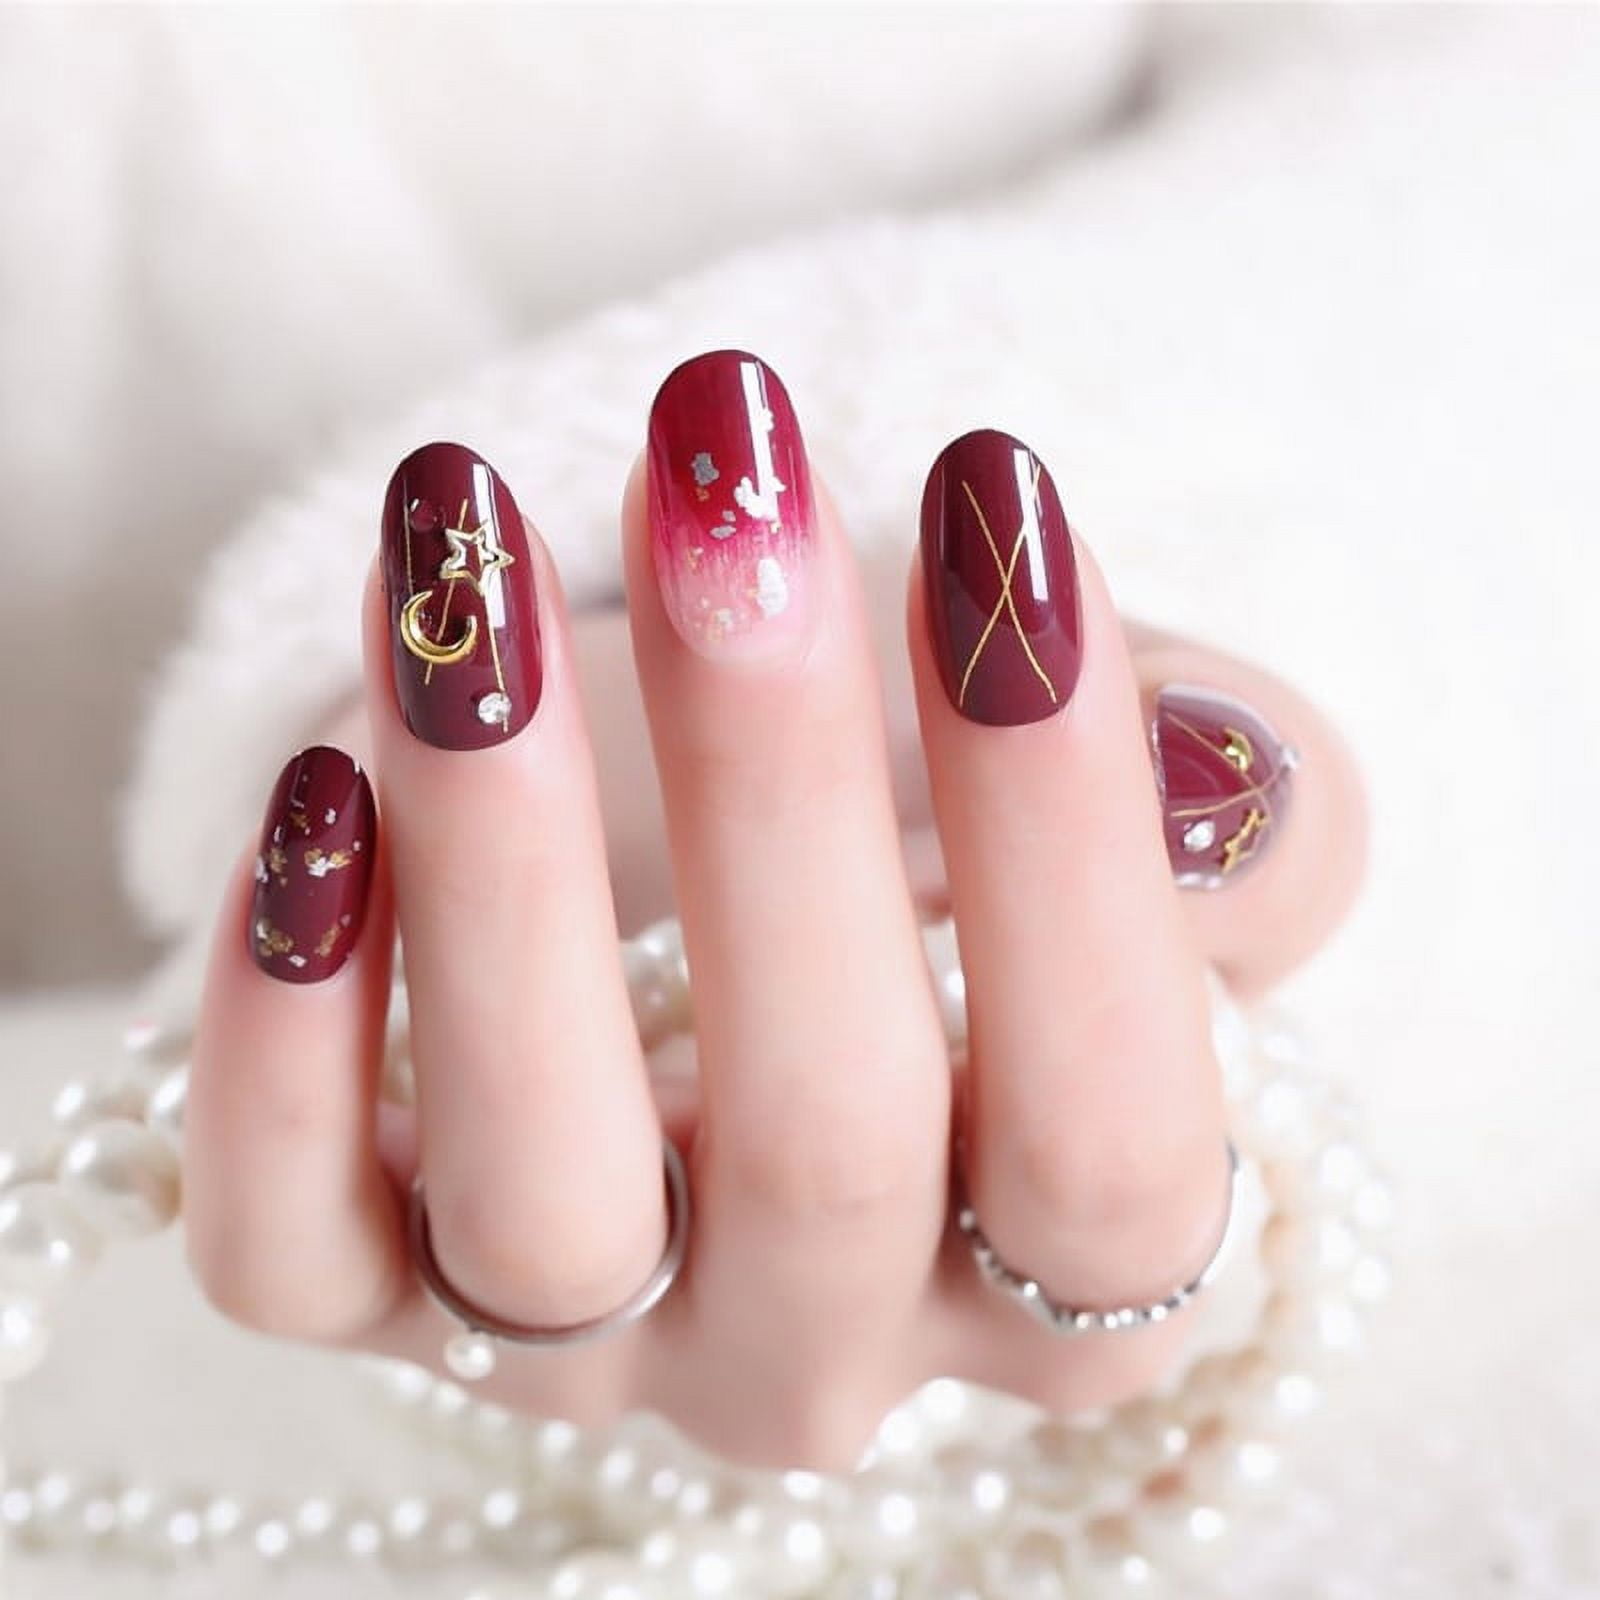 Gradual Wine Red Color with Star and Moon Pendant 3D Fake Nails Japanese Bride False Nails 24PCS Lady Full Nail Tips 97f76cac 2cab 48bc 81db 0a08d6a67d15.14ac80b43f9a3fd19bf16aed63cc3ada